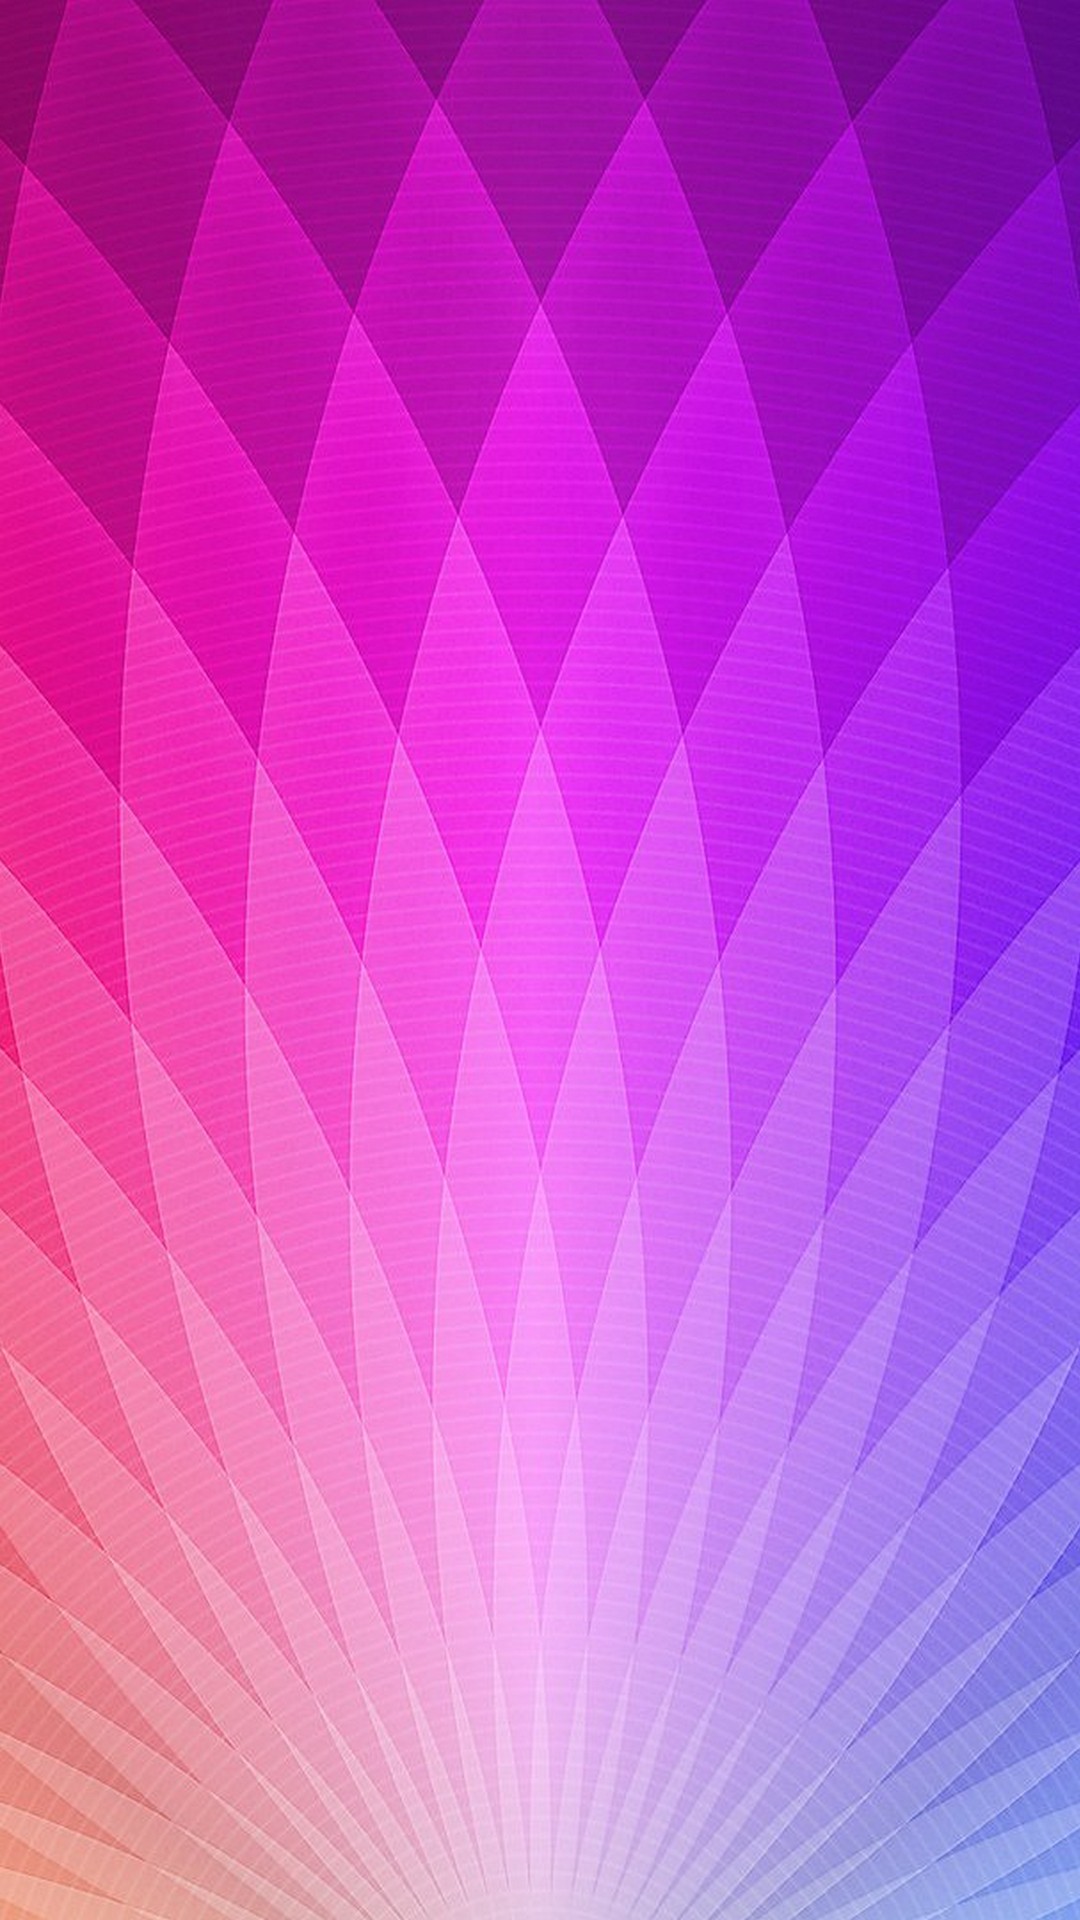 Colorful iPhone Wallpaper Tumblr with high-resolution 1080x1920 pixel. You can set as wallpaper for Apple iPhone X, XS Max, XR, 8, 7, 6, SE, iPad. Enjoy and share your favorite HD wallpapers and background images